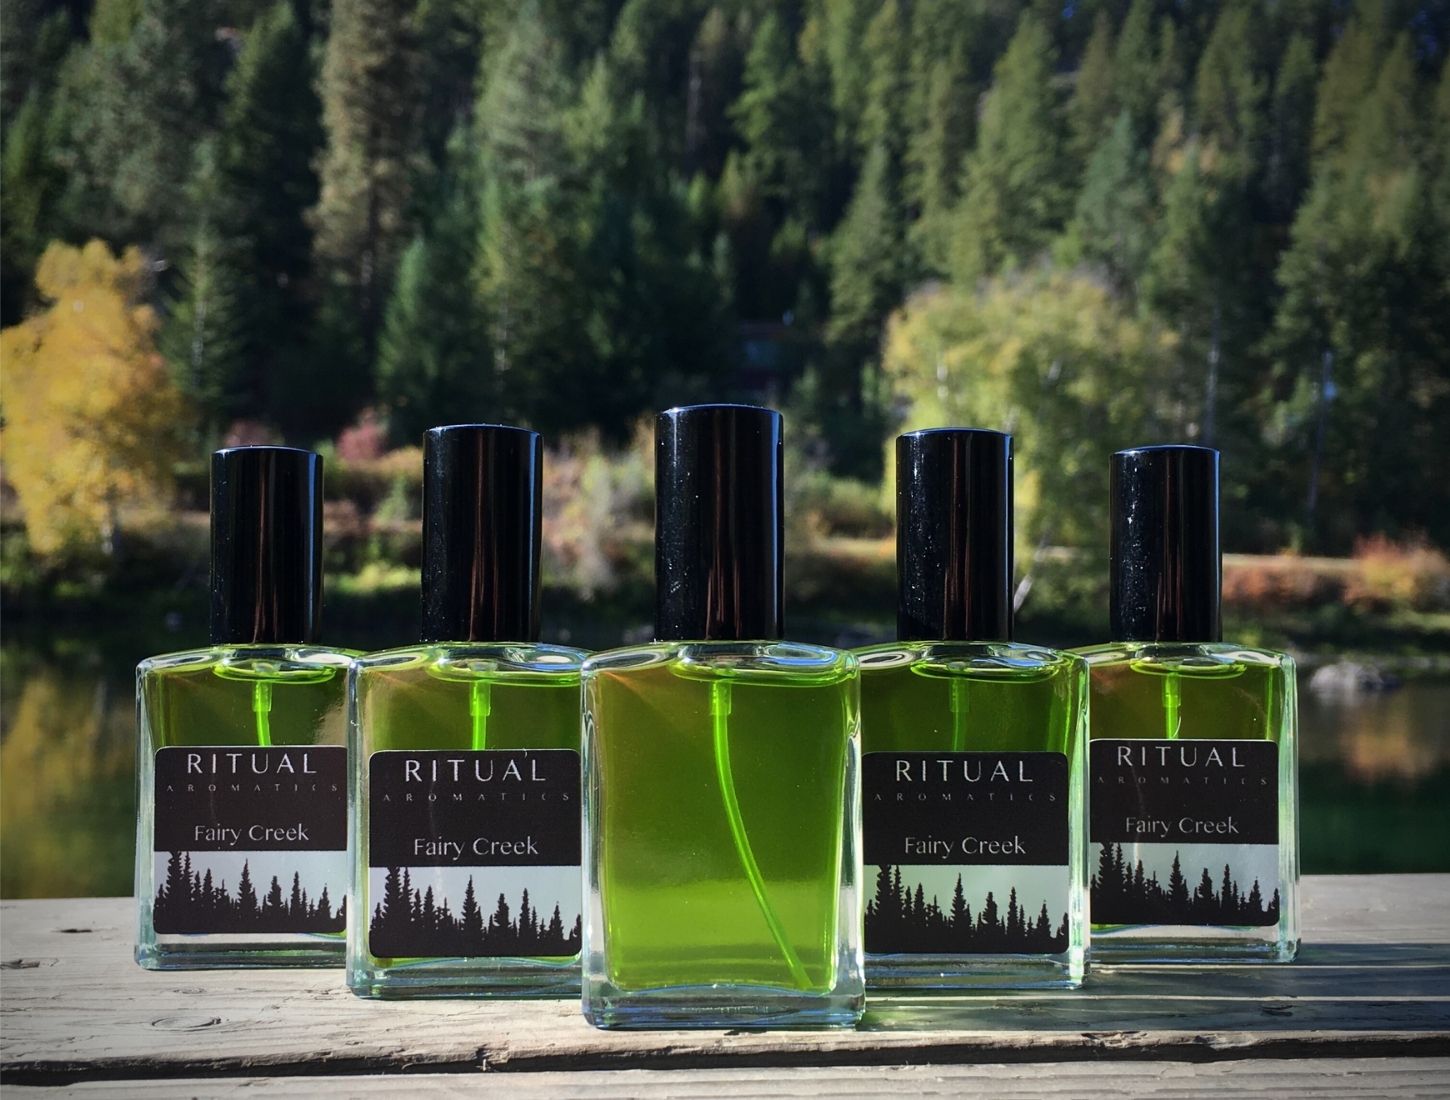 Ritual Aromatics Fairy Creek Natural Botanical Perfume bottles on a dock by water and trees